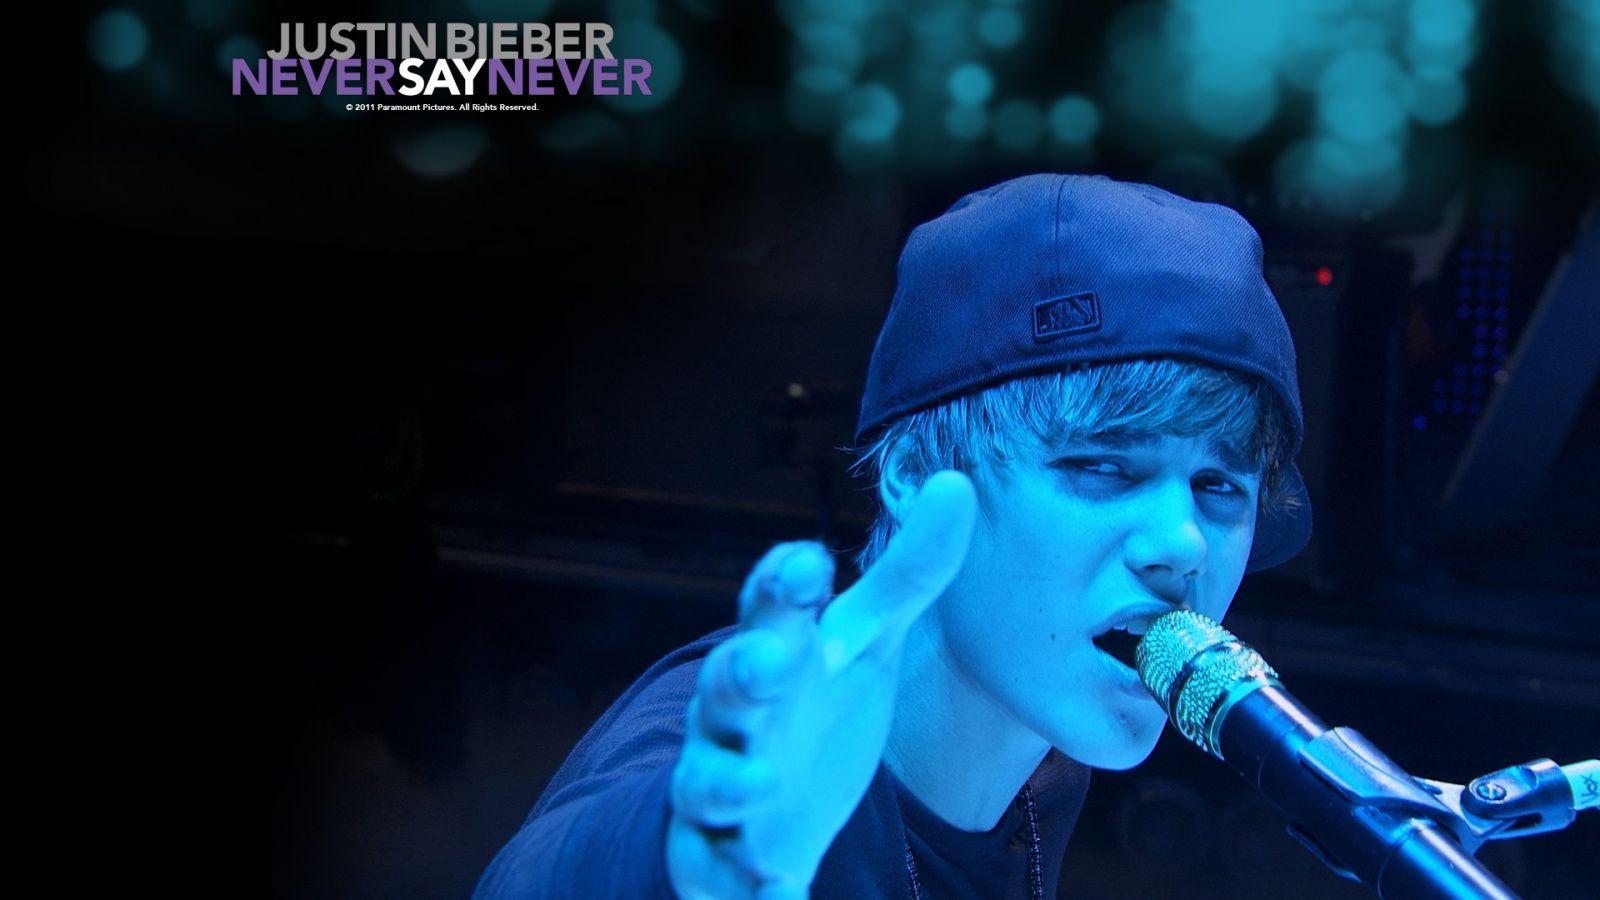 Justin Bieber Never Say Never Wallpaper in jpg format for free download